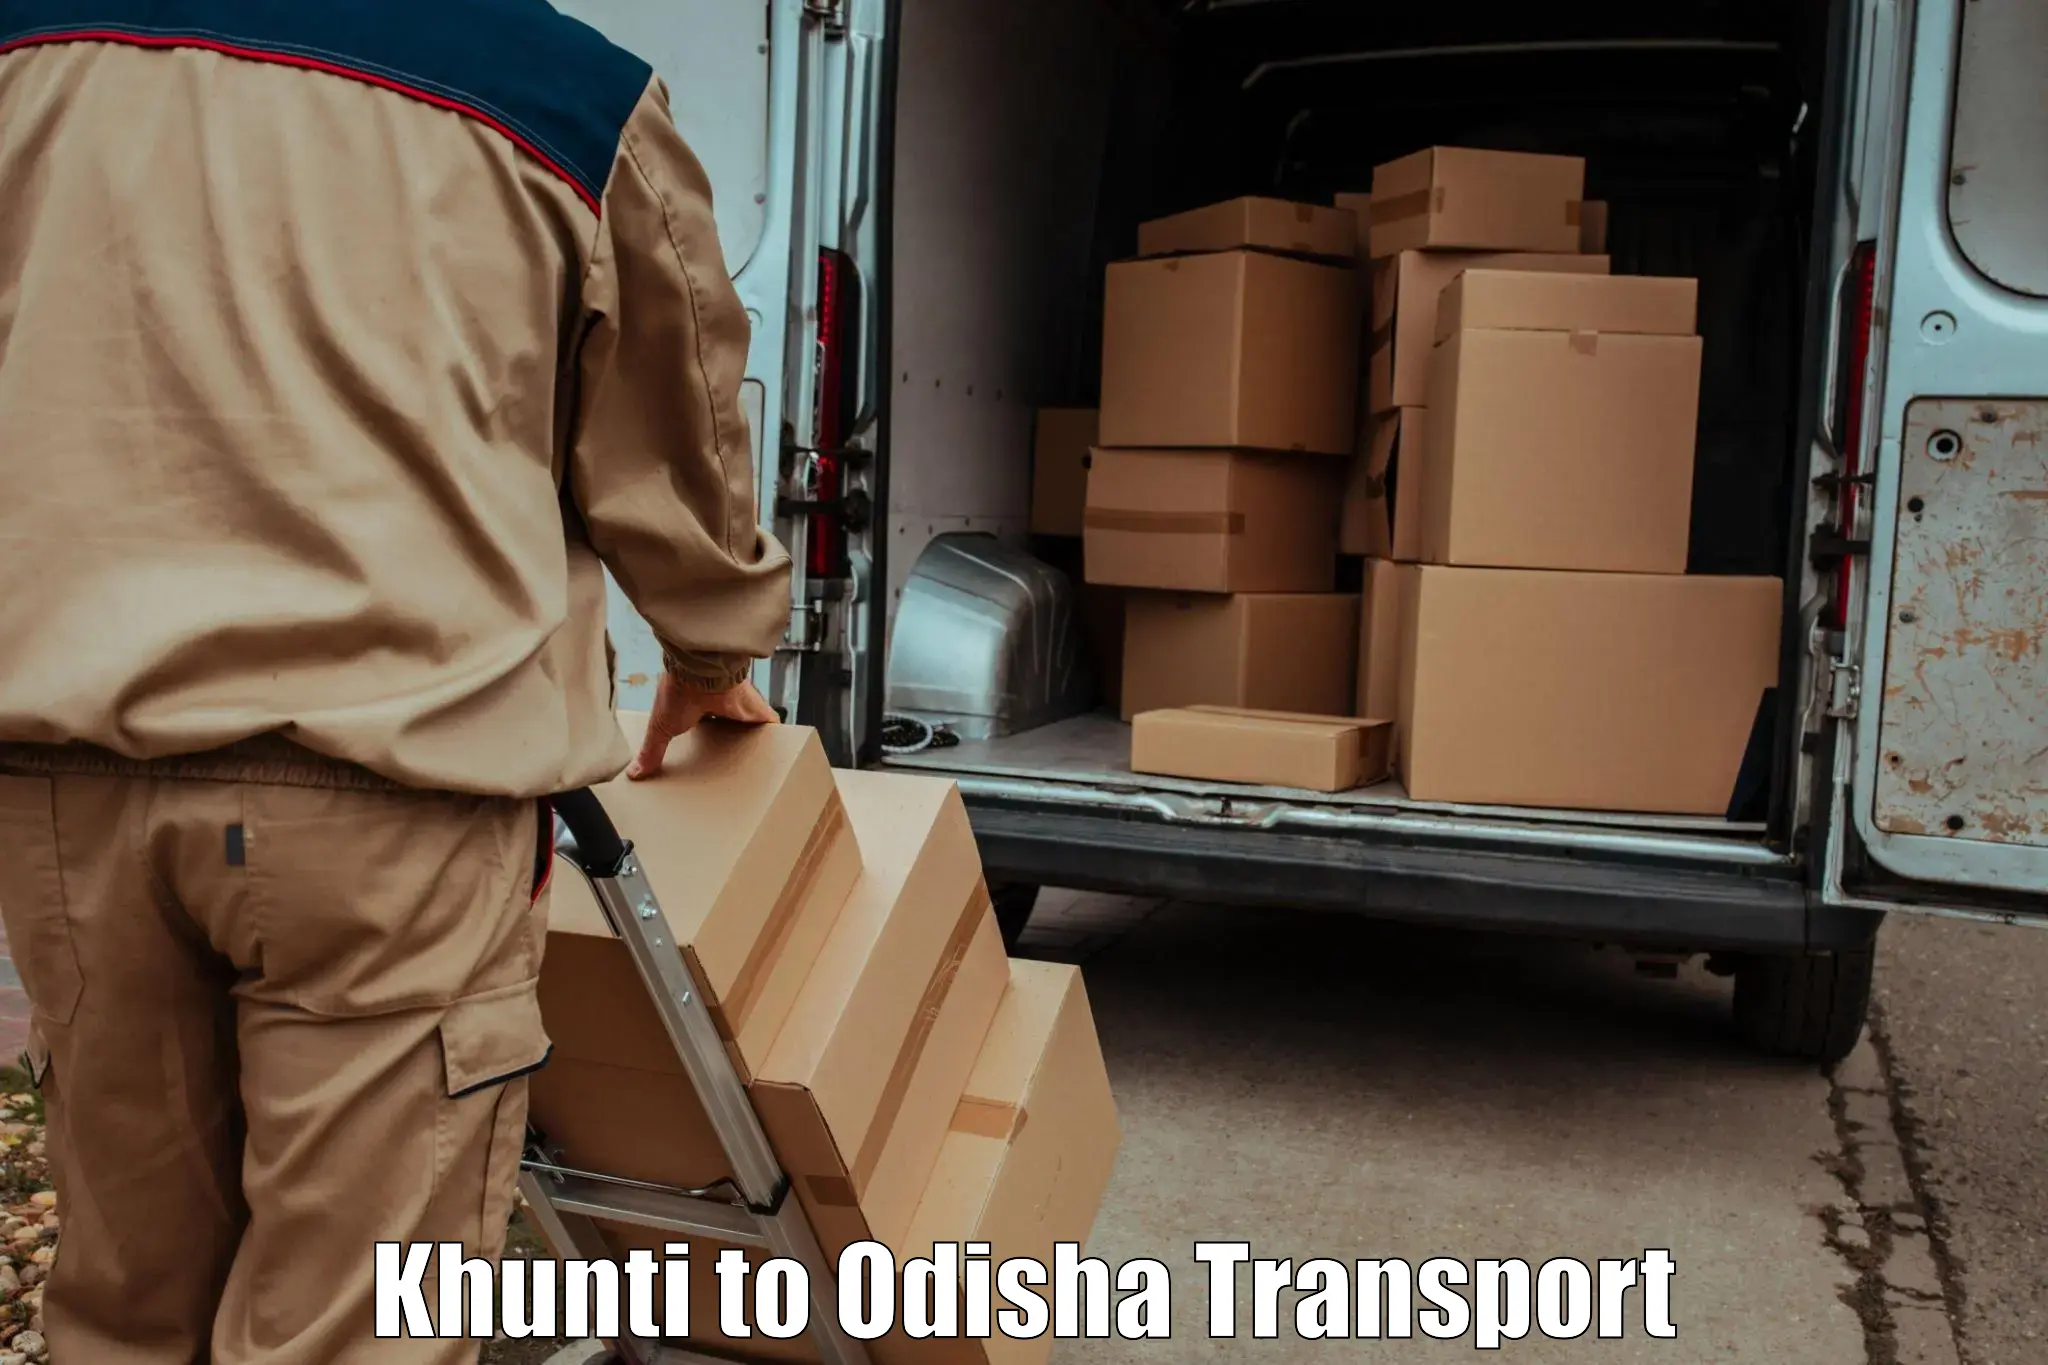 Transport bike from one state to another Khunti to Odisha